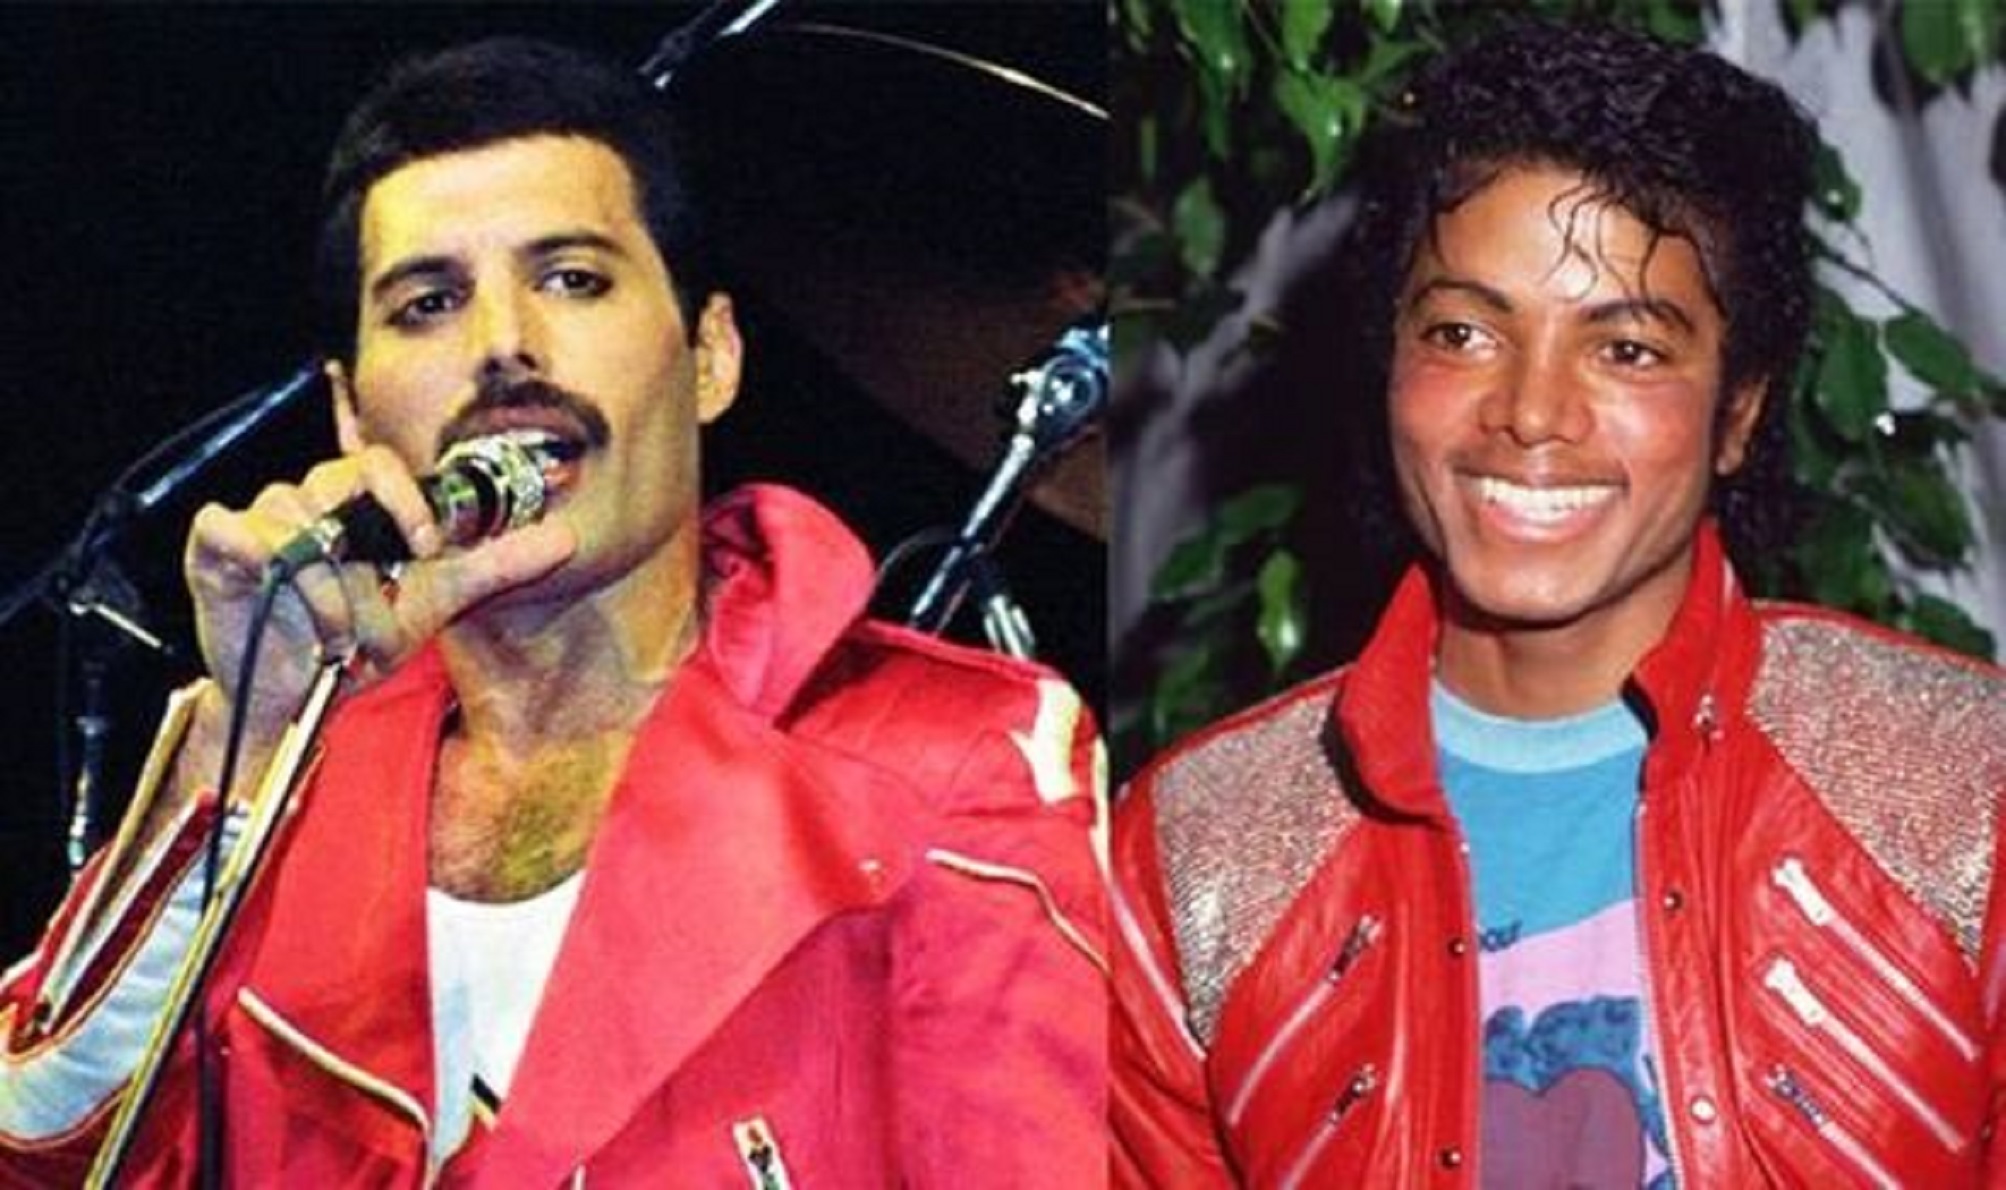 Freddie Mercury Or Michael Jackson – Who’s The Most Iconic Male Singer? Vote Here!